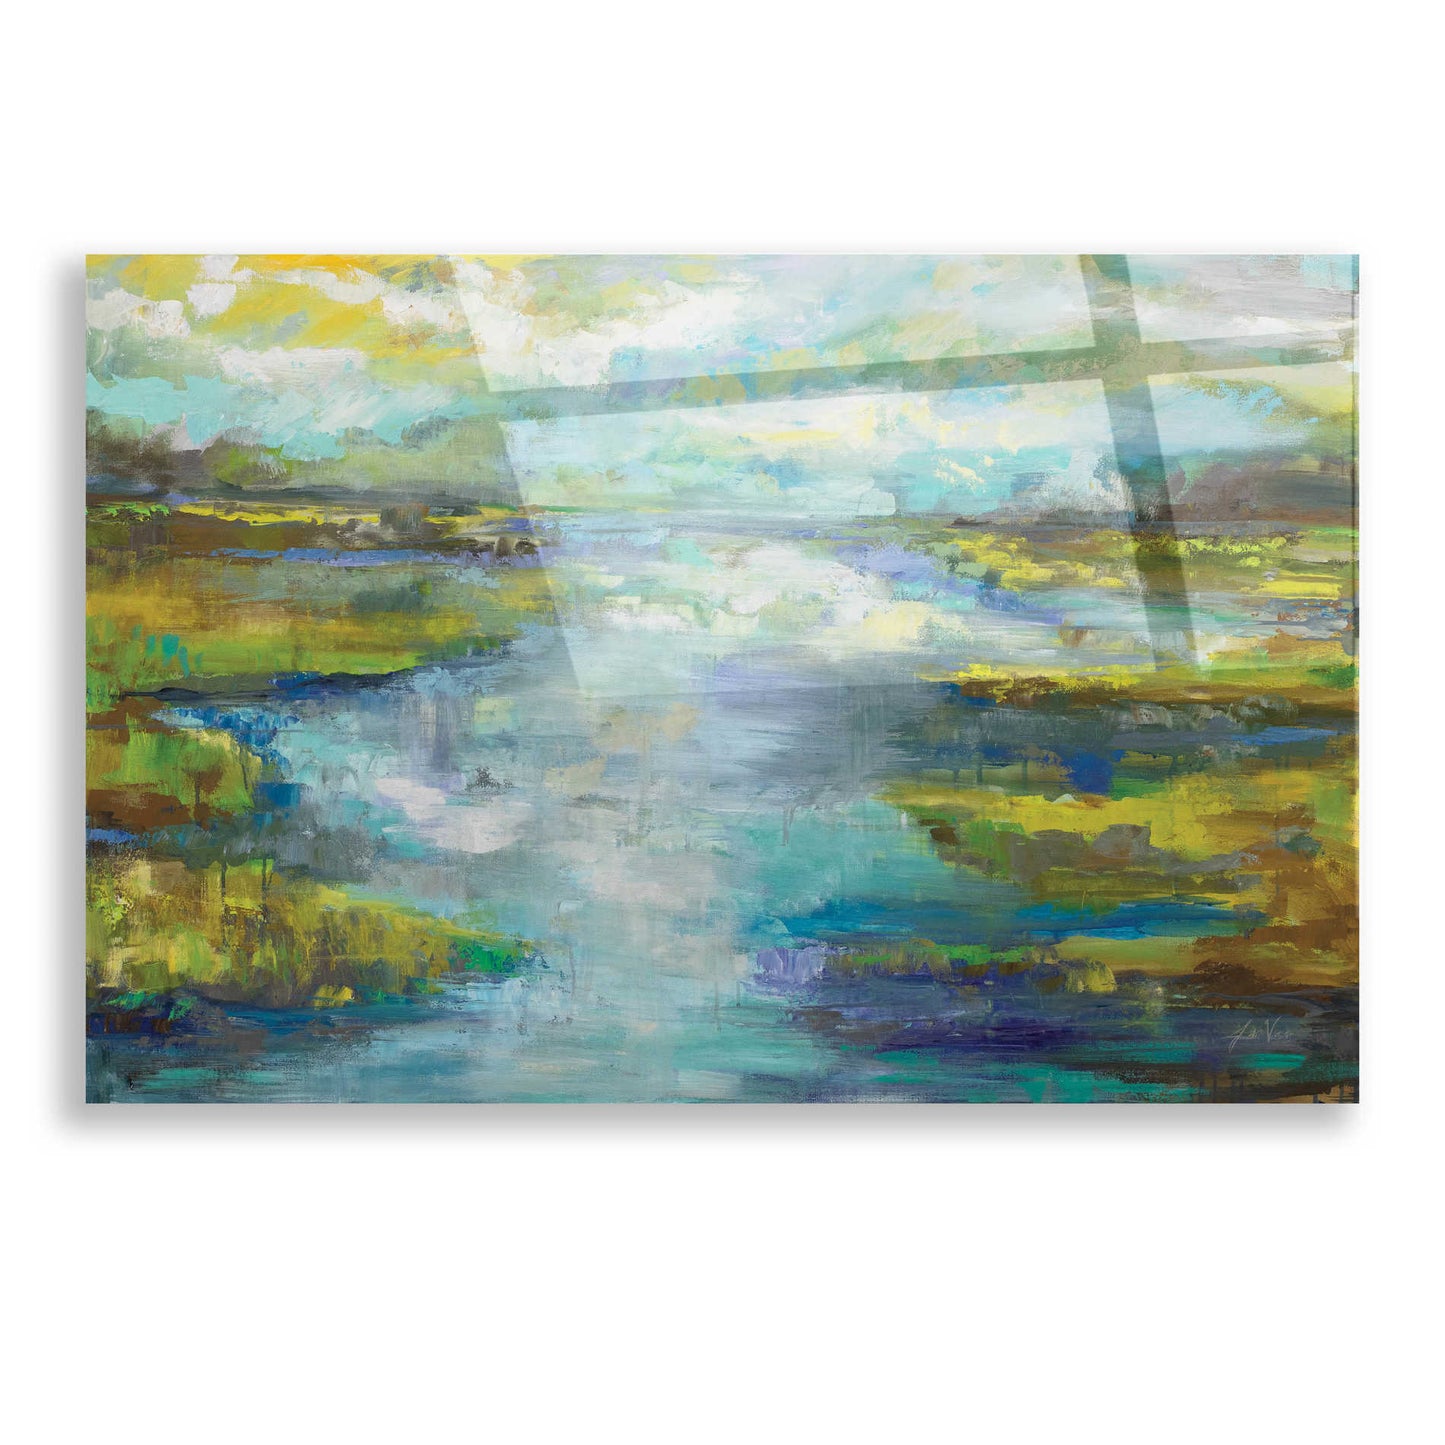 Epic Art 'Quietude' by Jeanette Vertentes, Acrylic Glass Wall Art,16x12